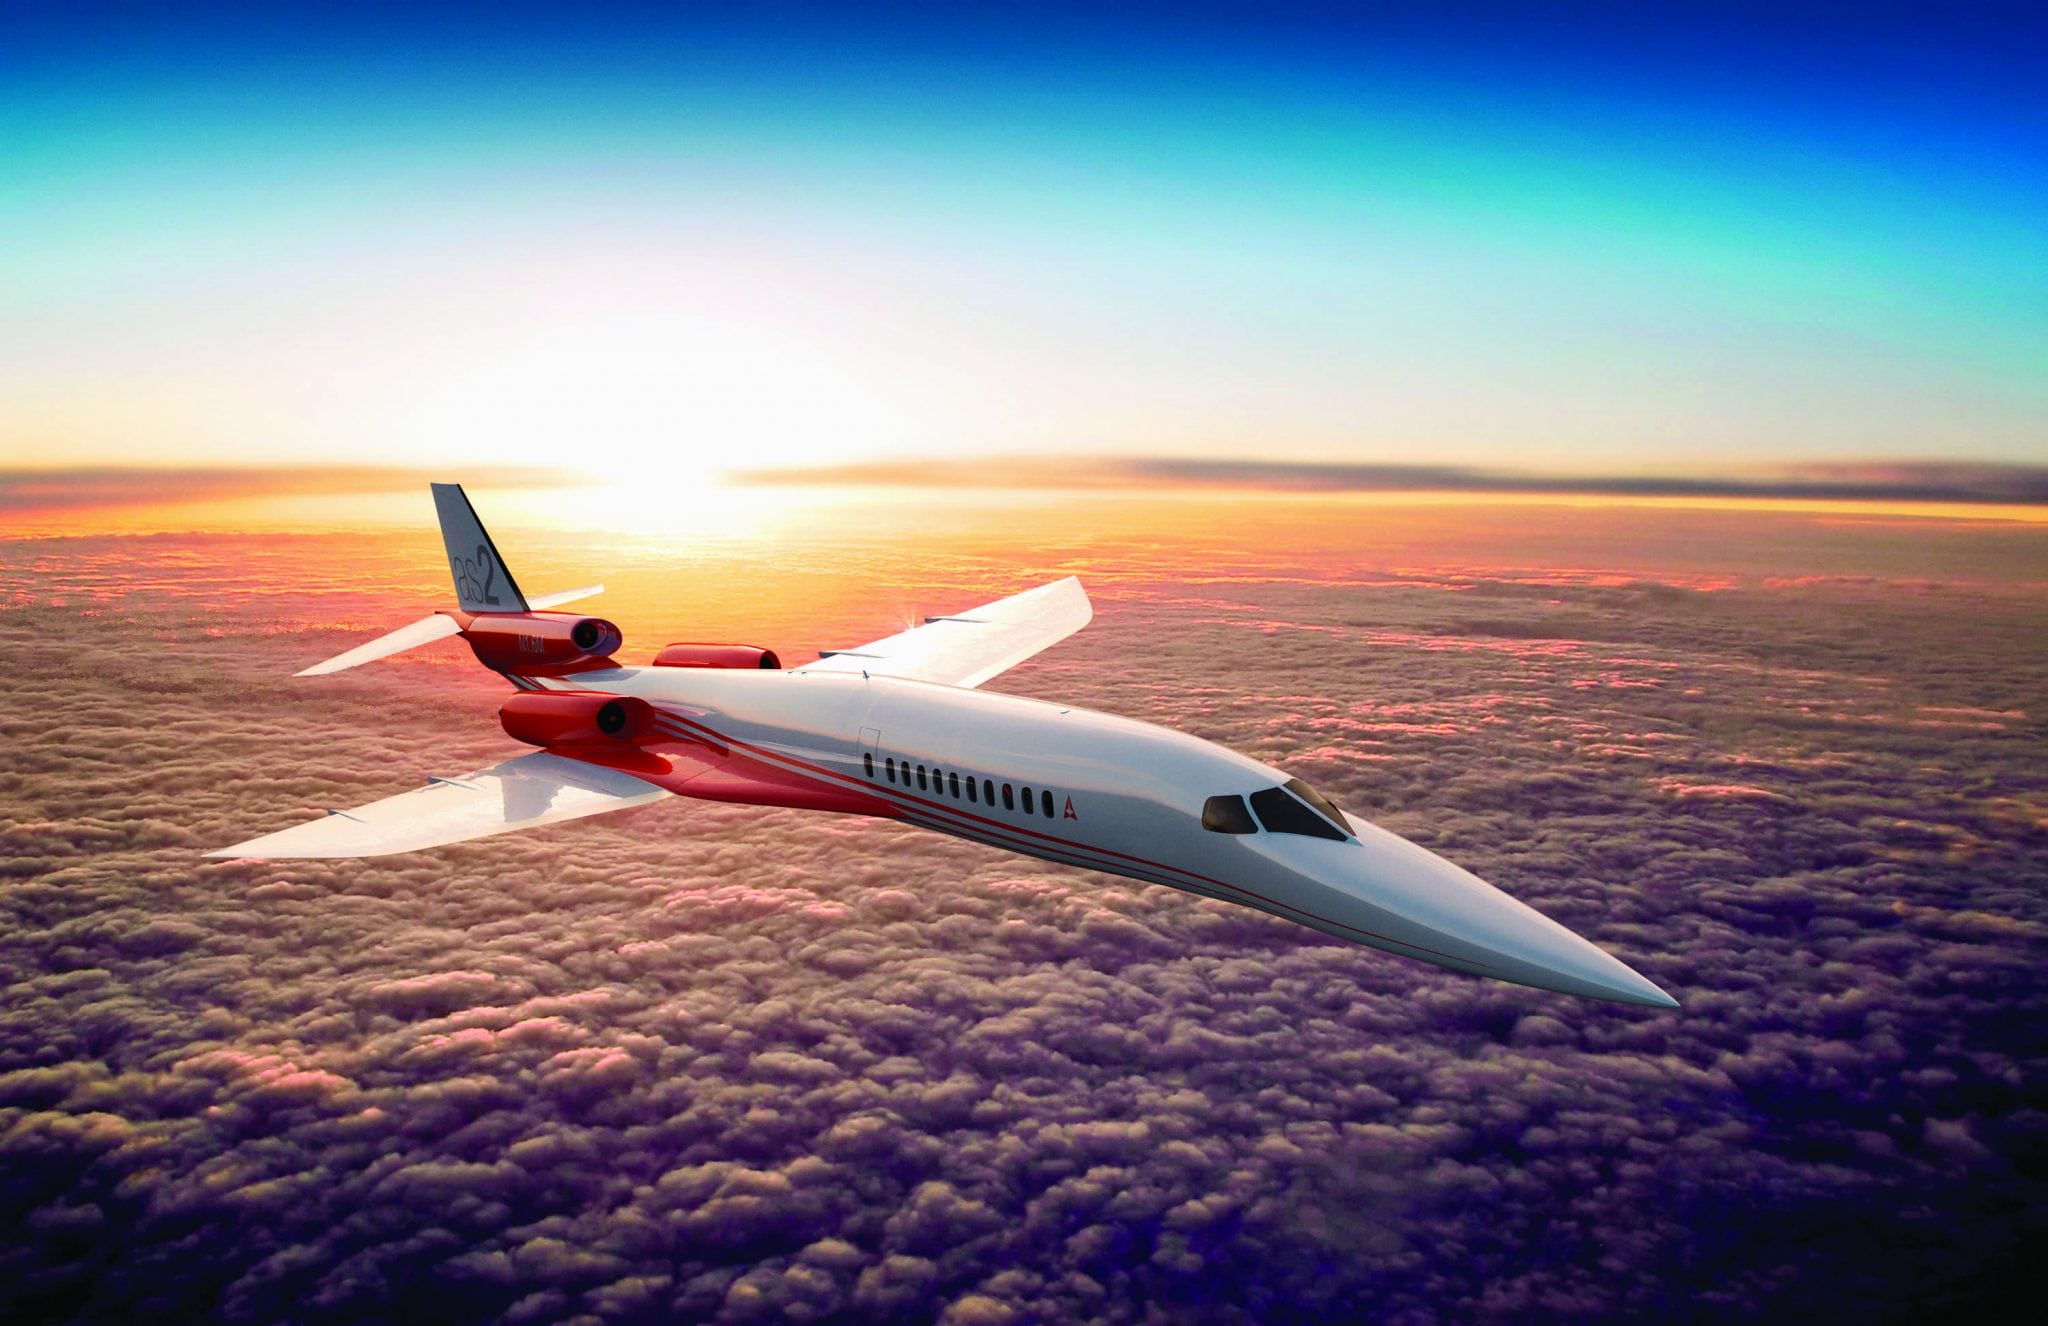 Aerion AS2 Supersonic business jet